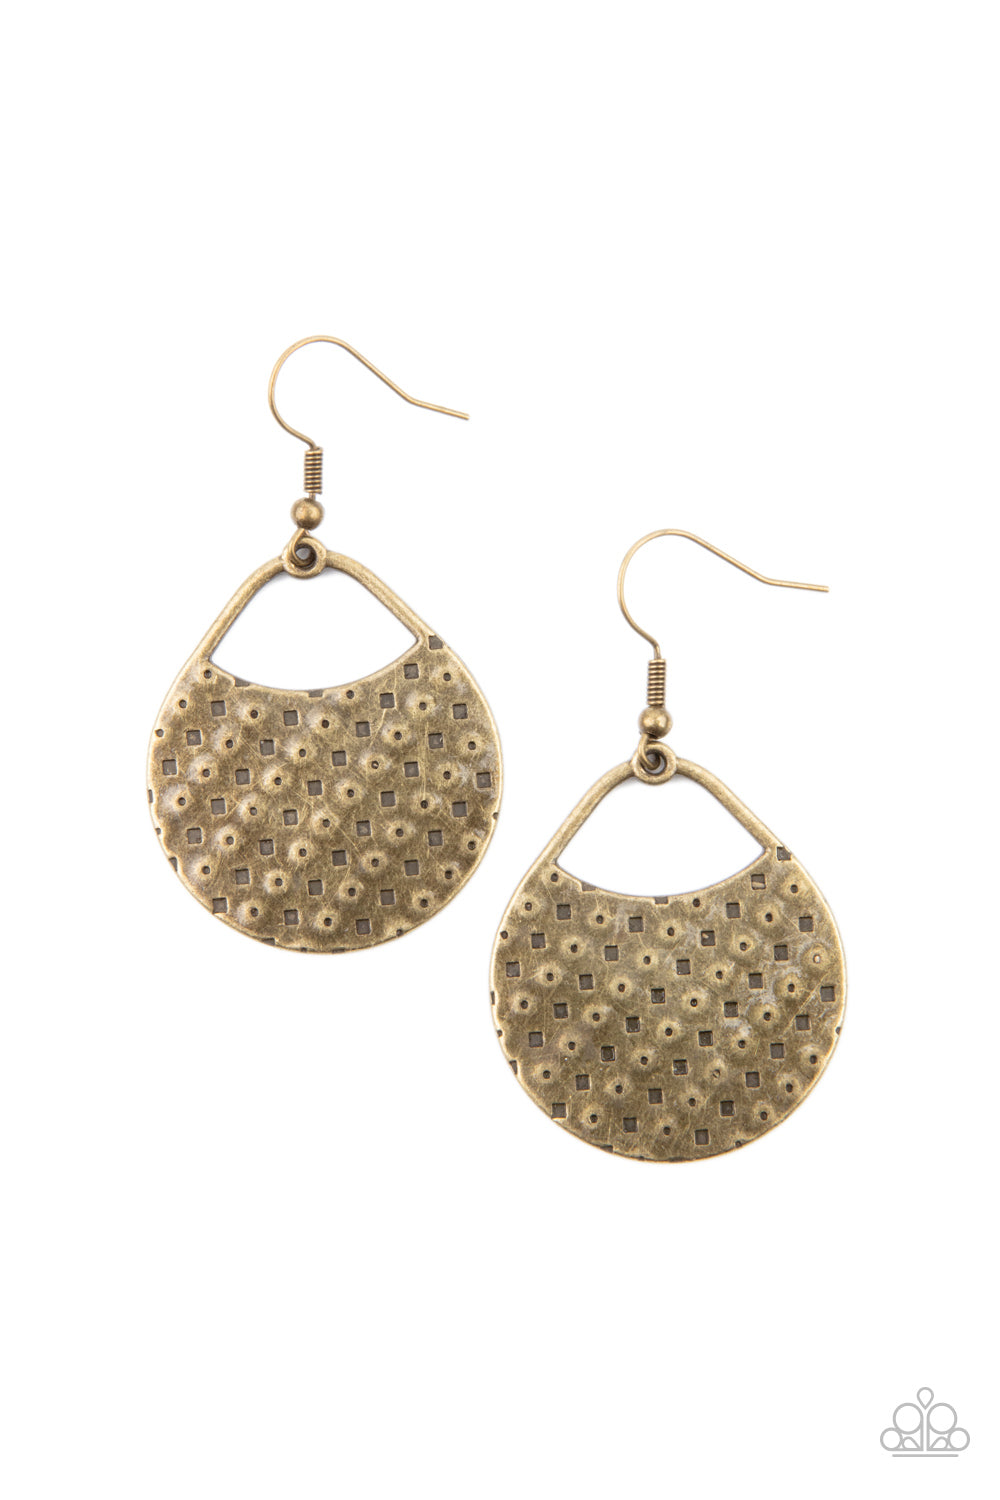 Paparazzi Accessories Im Sensing a Pattern Here - Brass Earrings - Lady T Accessories